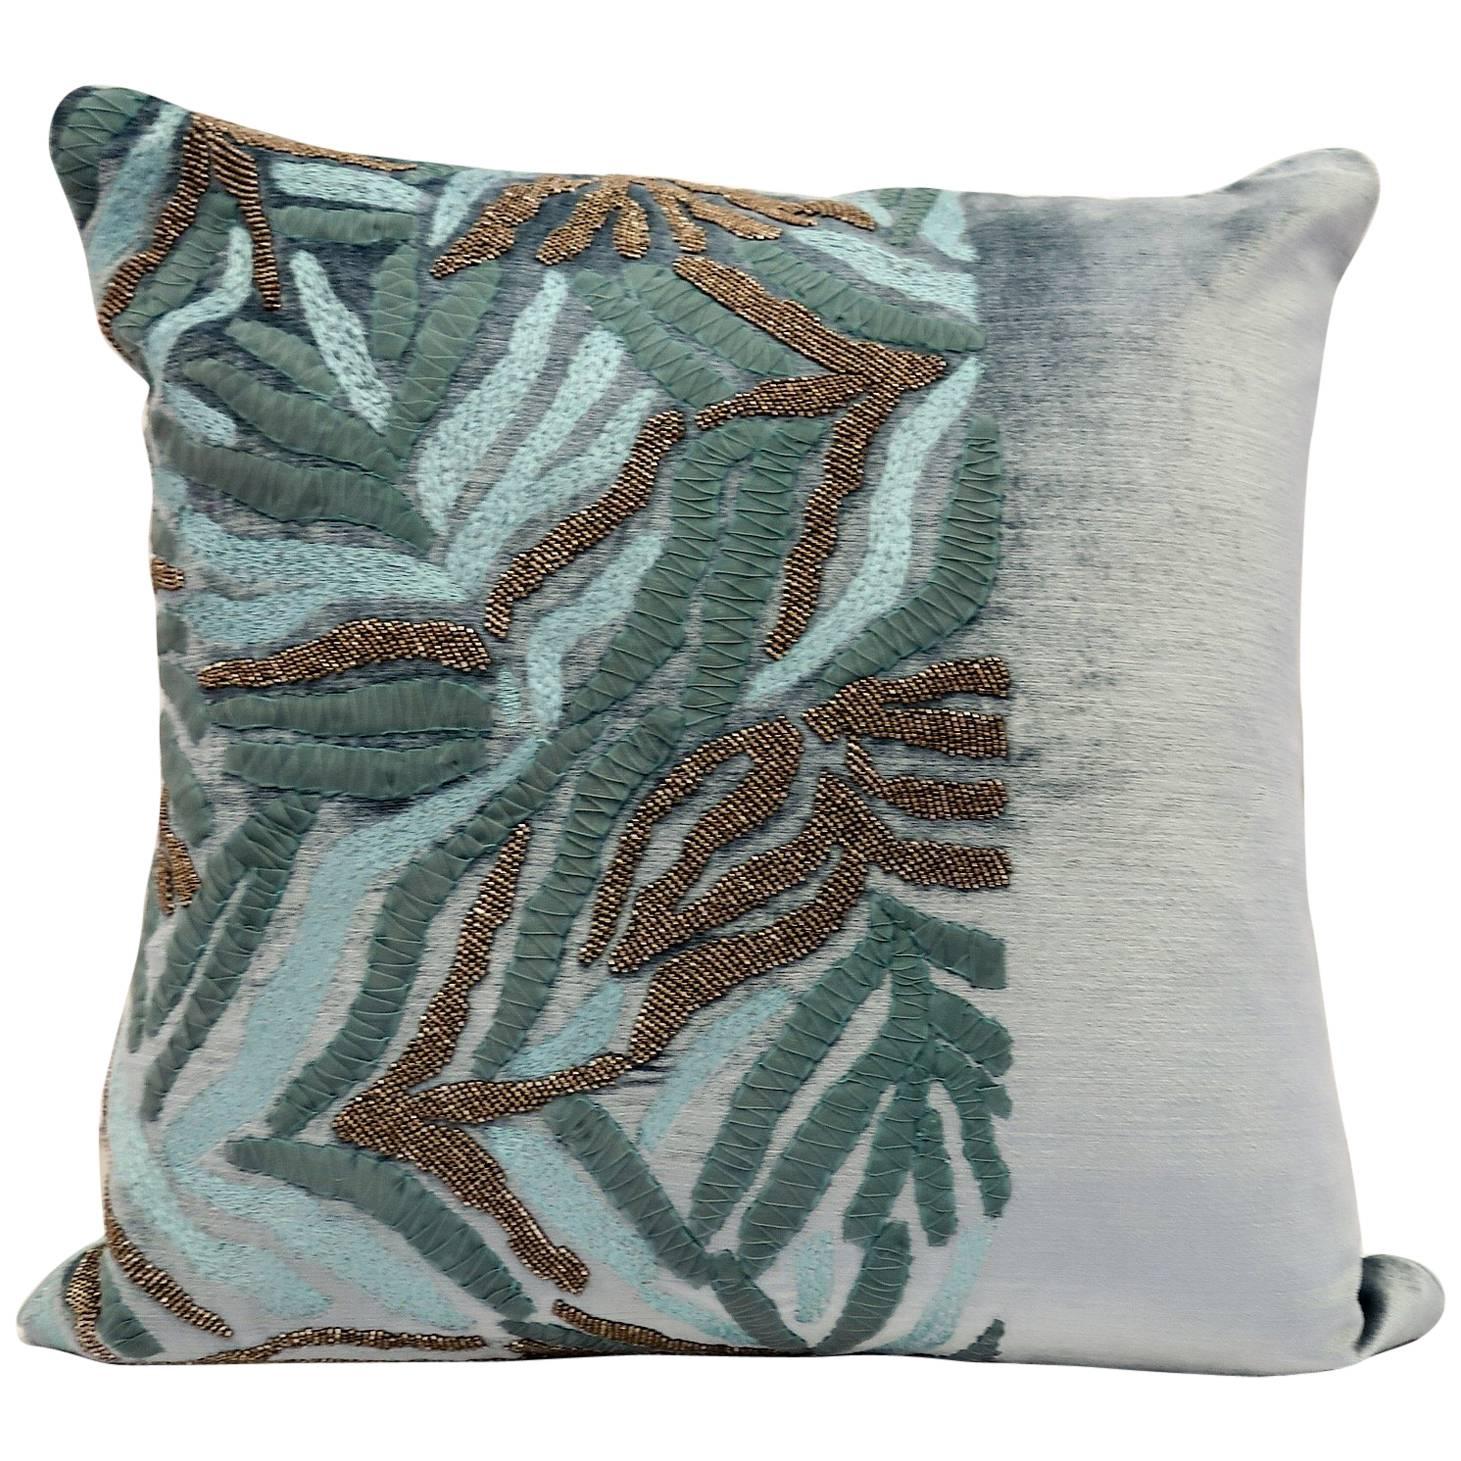 Handcrafted Velvet Pillow Hand Embroidered Abstract Aqua Foliage Design For Sale